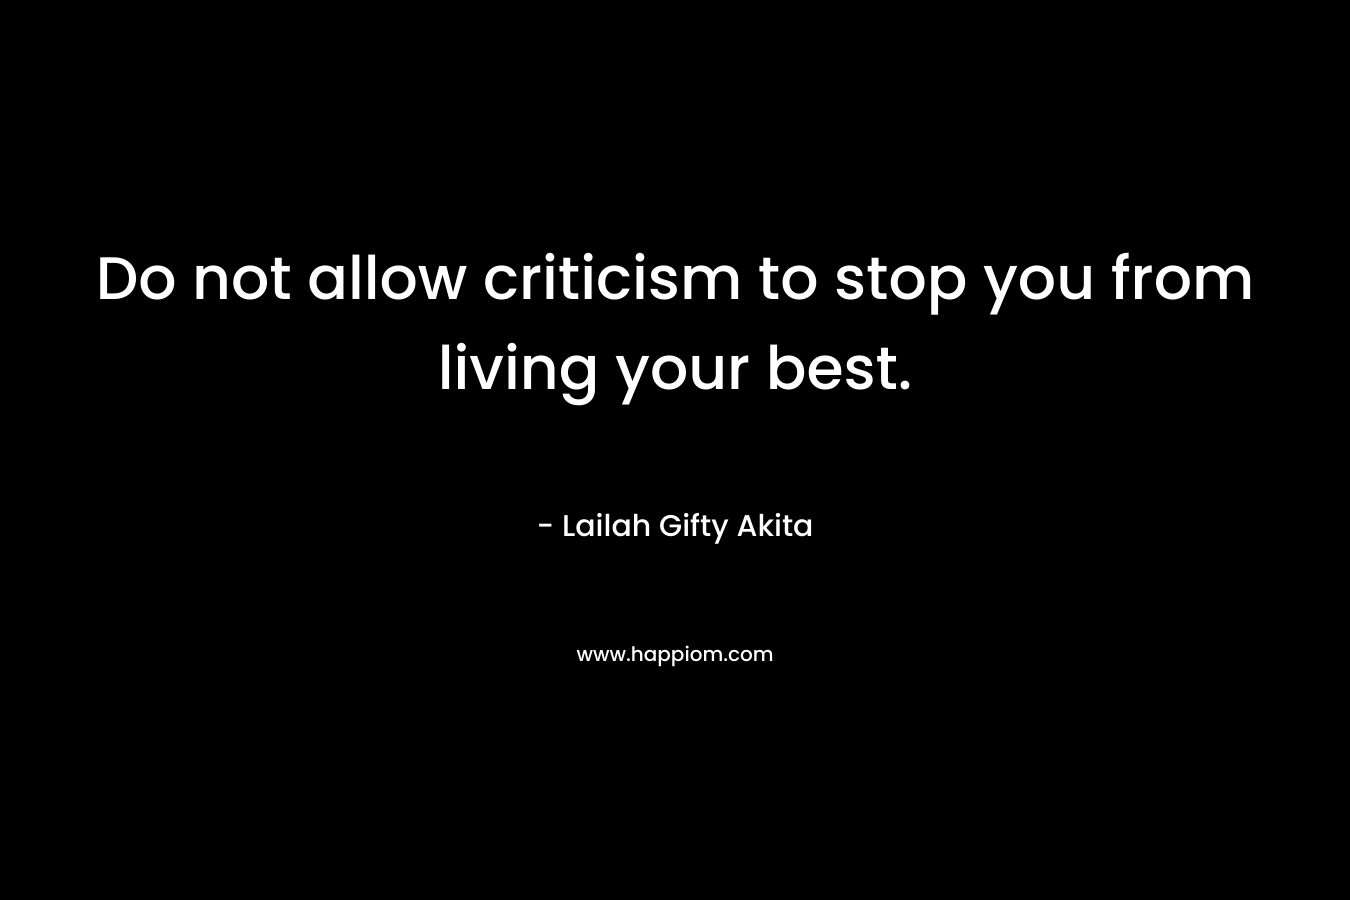 Do not allow criticism to stop you from living your best. – Lailah Gifty Akita